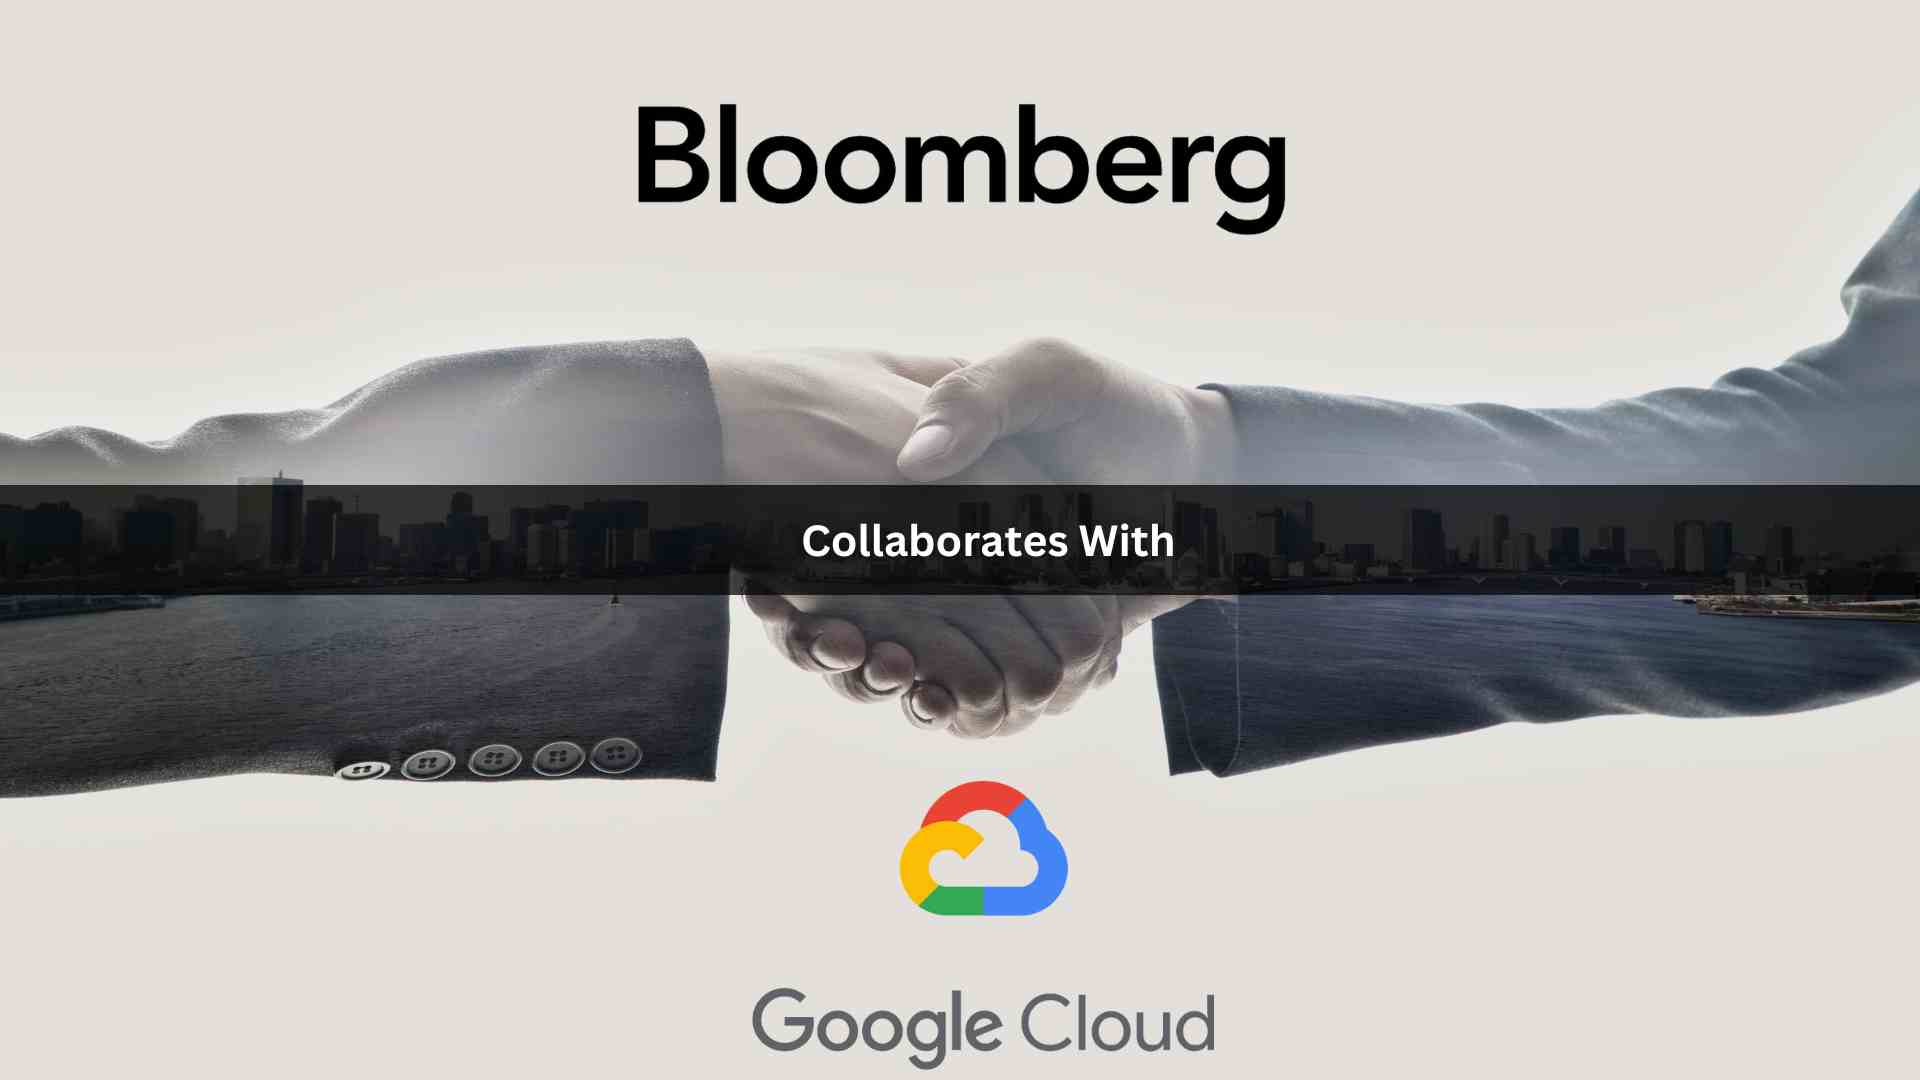 Bloomberg Collaborates with Google Cloud to Accelerate Innovation in Data Management and Analytics